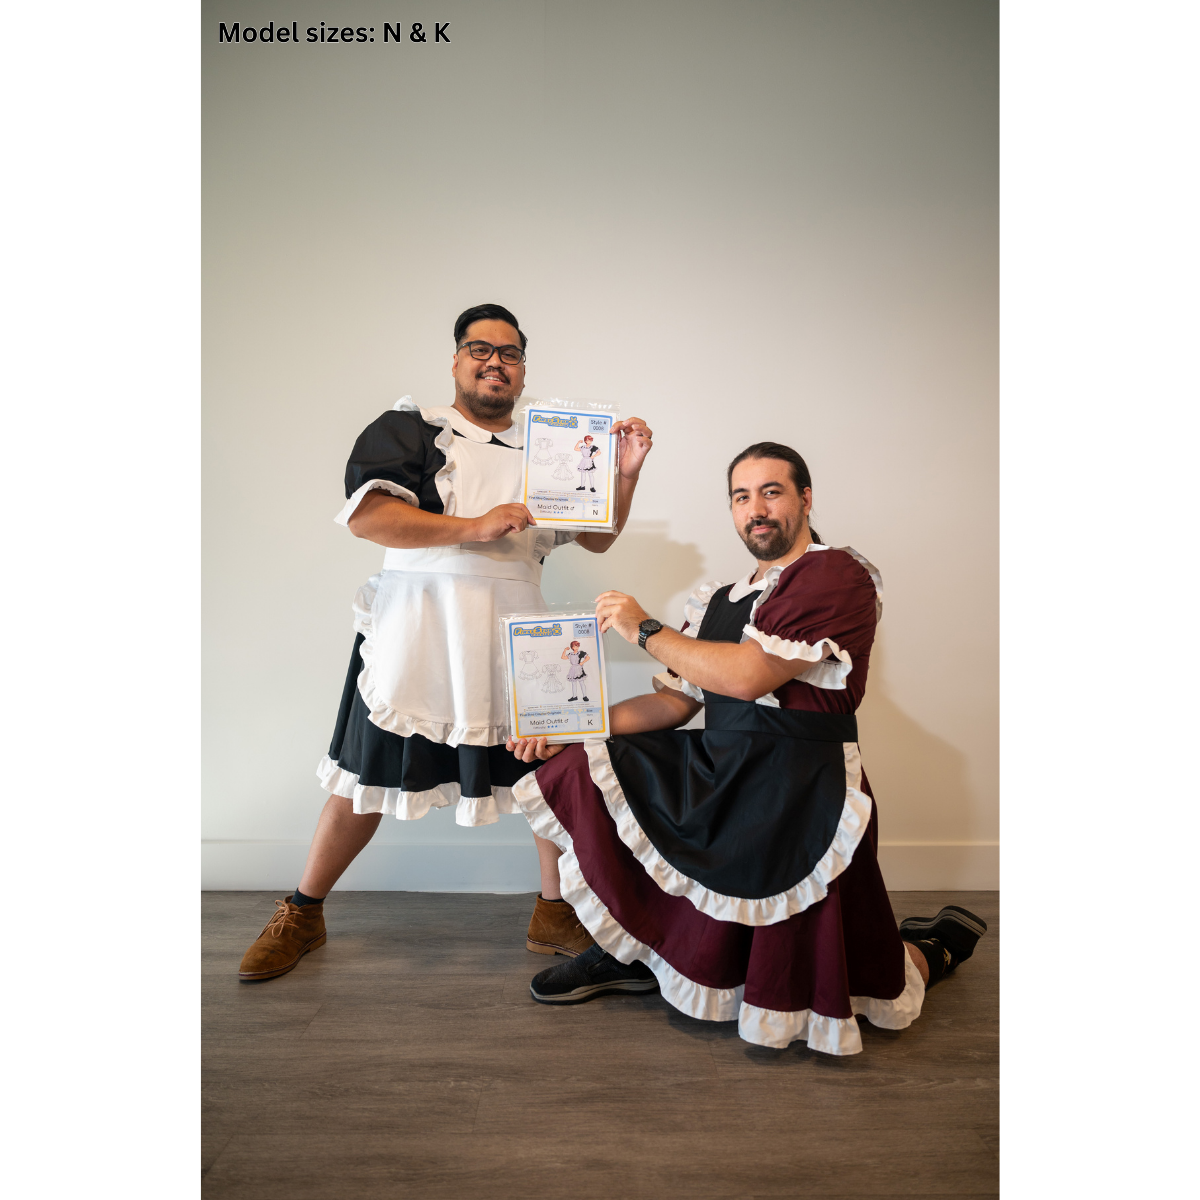 Two male models posing while wearing completed FSCO Maid Outfits (m). The model on the left is Size N, wearing a black dress with white trim and white apron. He is holding packaging for this product and smiling. The other male model is wearing a completed size K Maid Outfit. His dress is maroon with white trim, and his apron is black with white trim. He is also kneeling and holding the product's packaging.